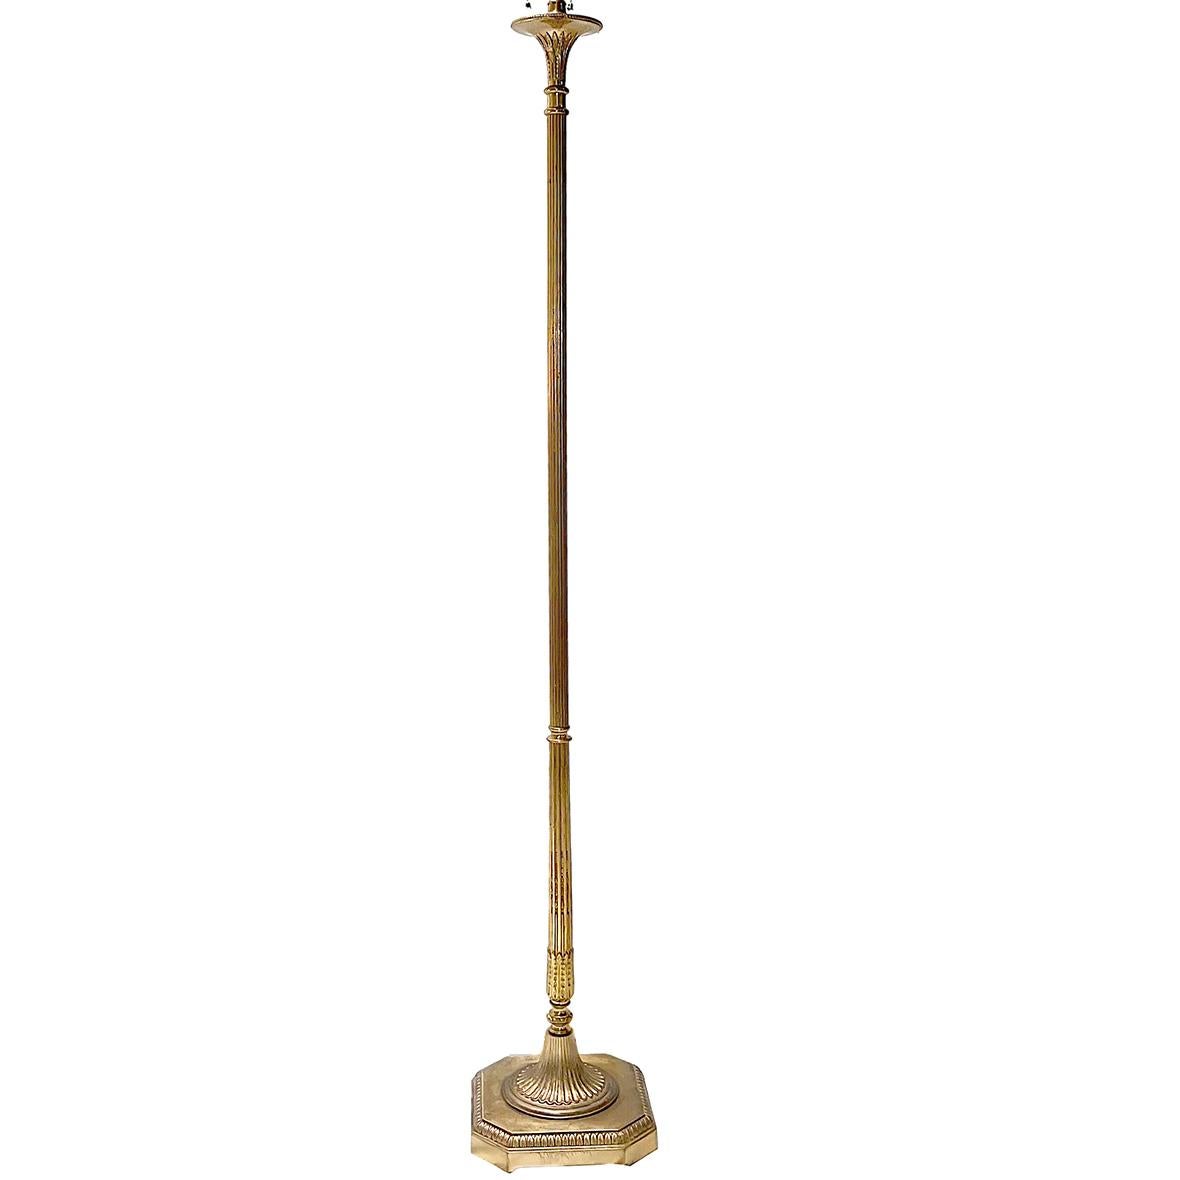 A circa 1930's French gilt bronze floor lamp. 

Measurements:
Height of body: 58″